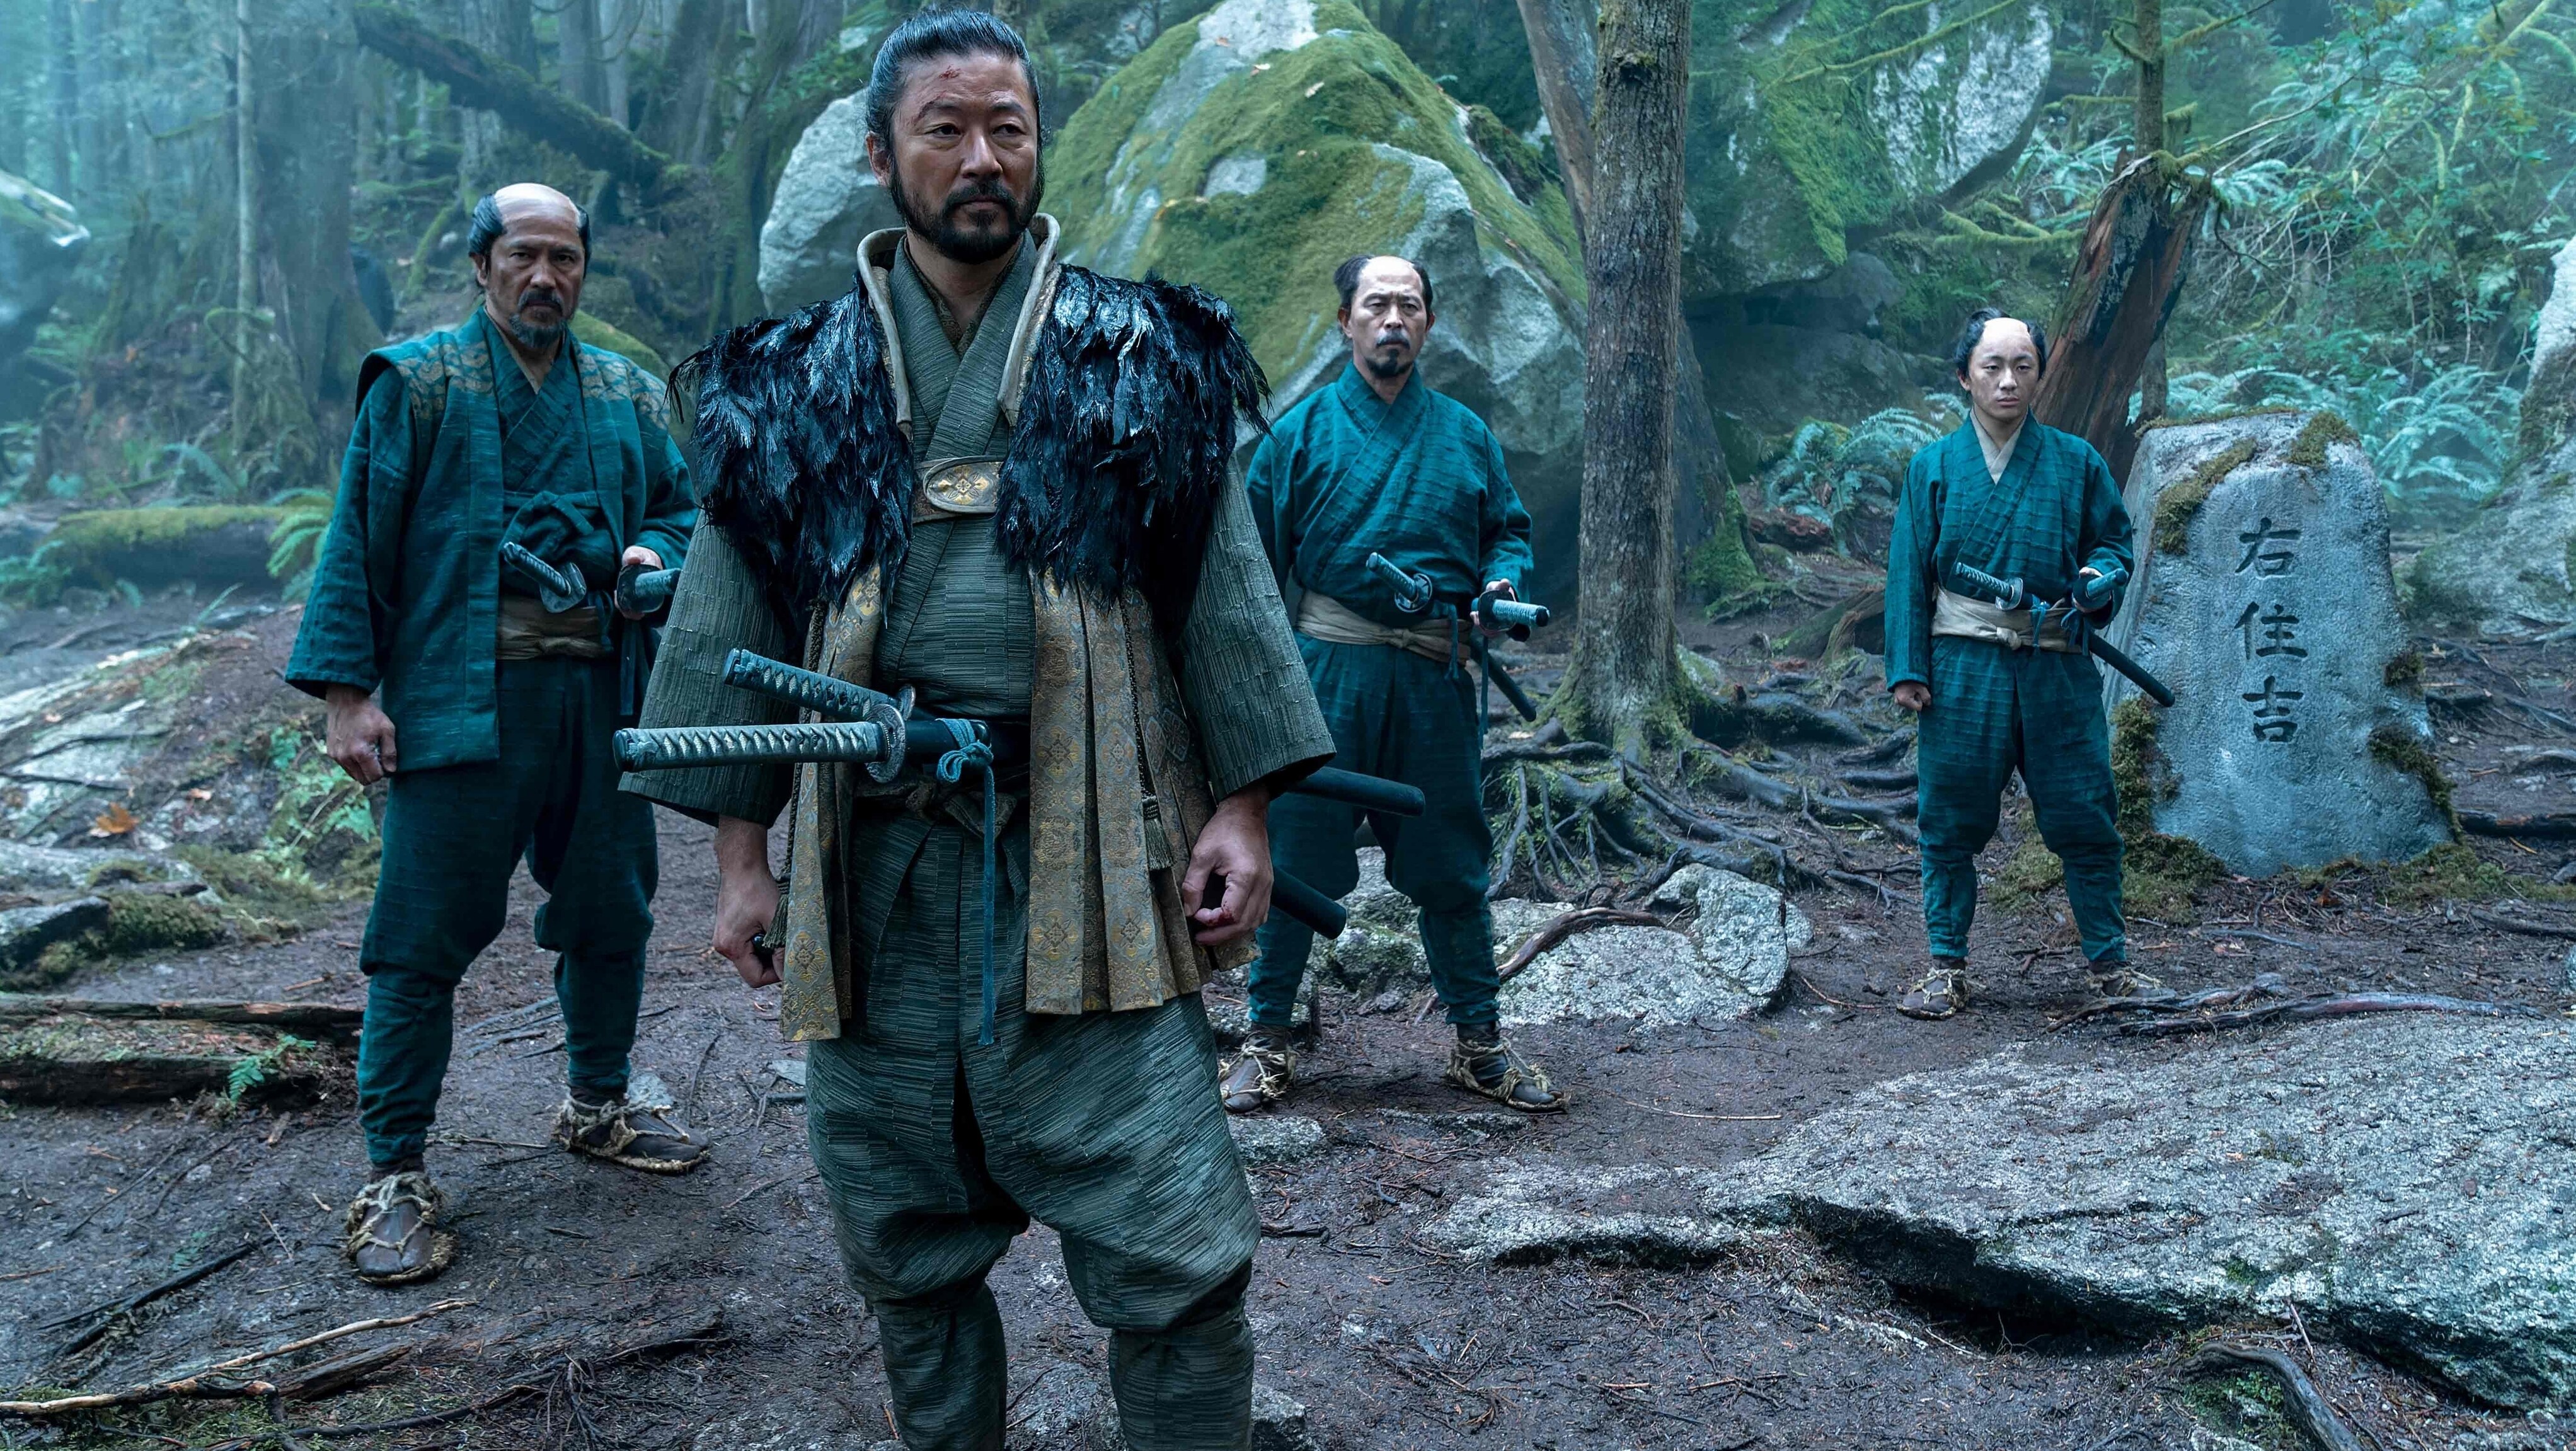 FX’S “SHŌGUN” PREMIERE BREAKS RECORDS WITH 9 MILLION VIEWS GLOBALLY ON HULU AND DISNEY+